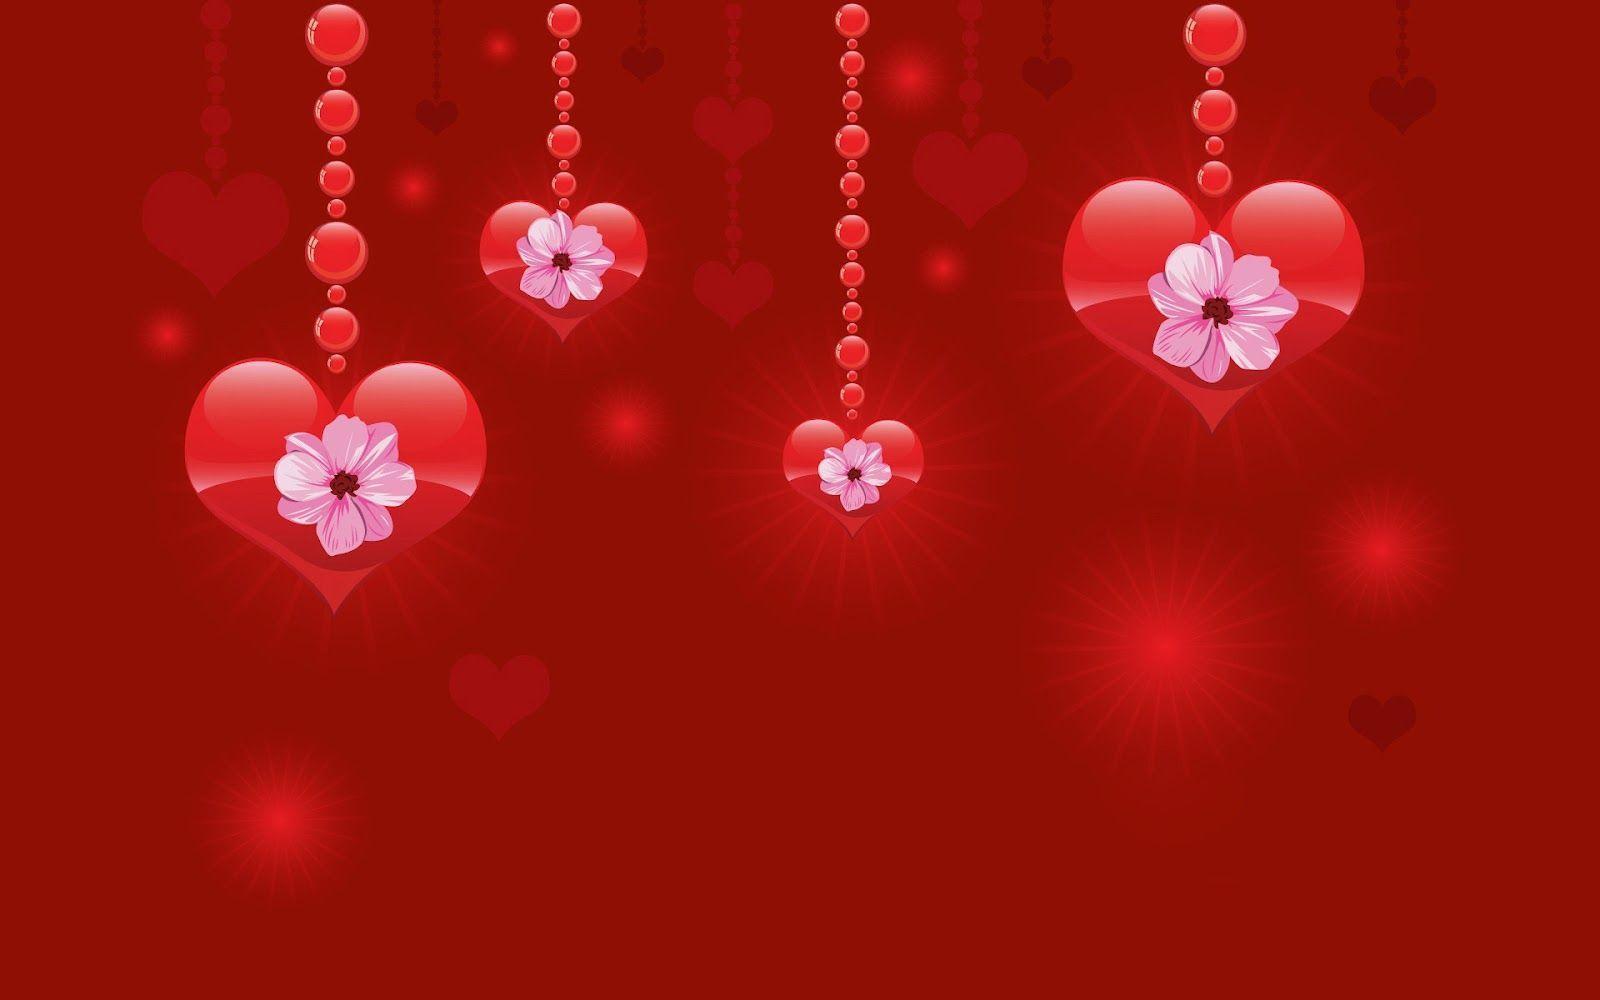 Valentines Day Wallpaper 2013 LOVE QUOTES